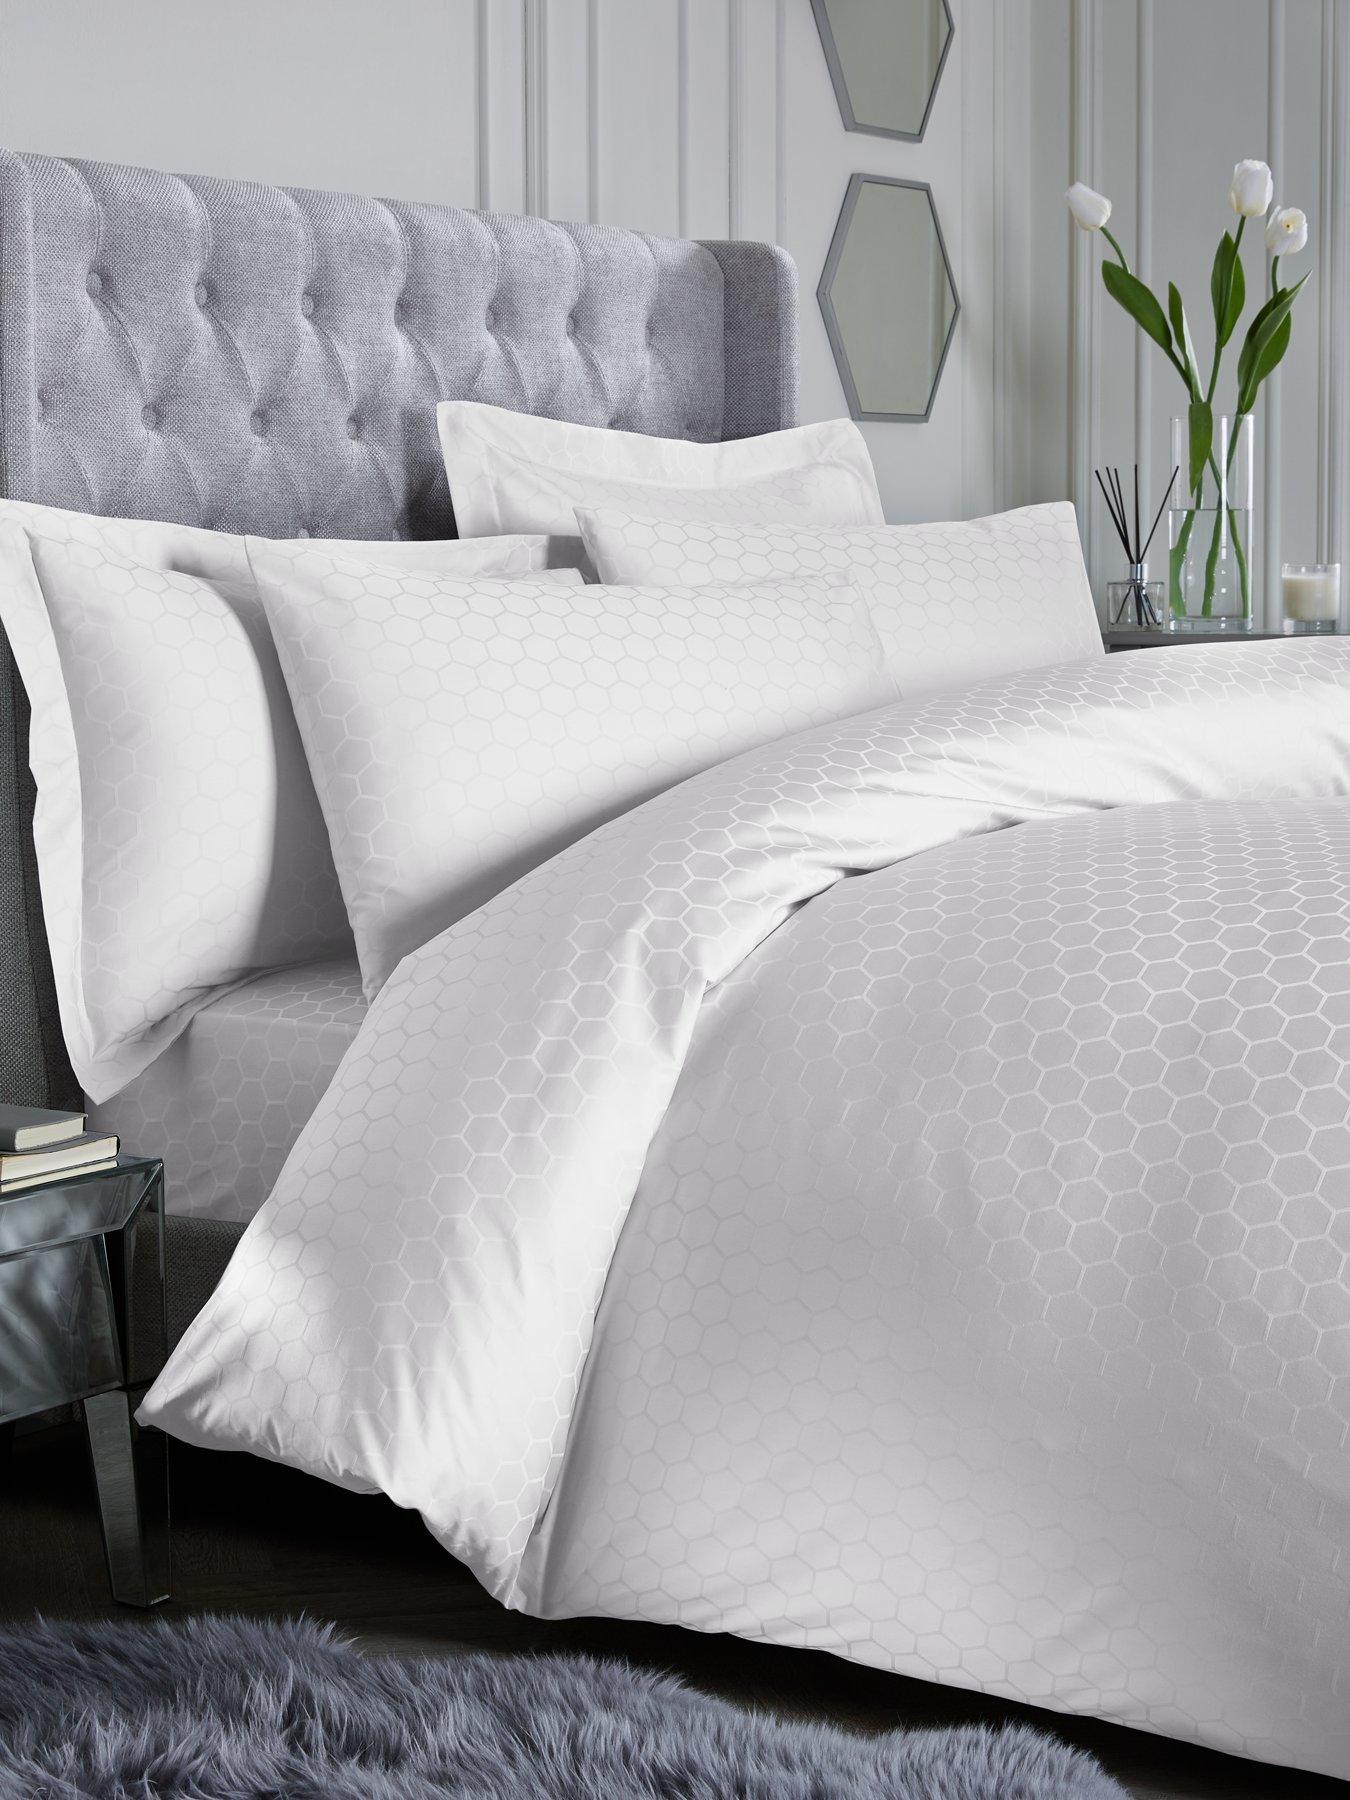 Hotel Collection Luxury 300 Thread Count Honeycomb Duvet Cover Set